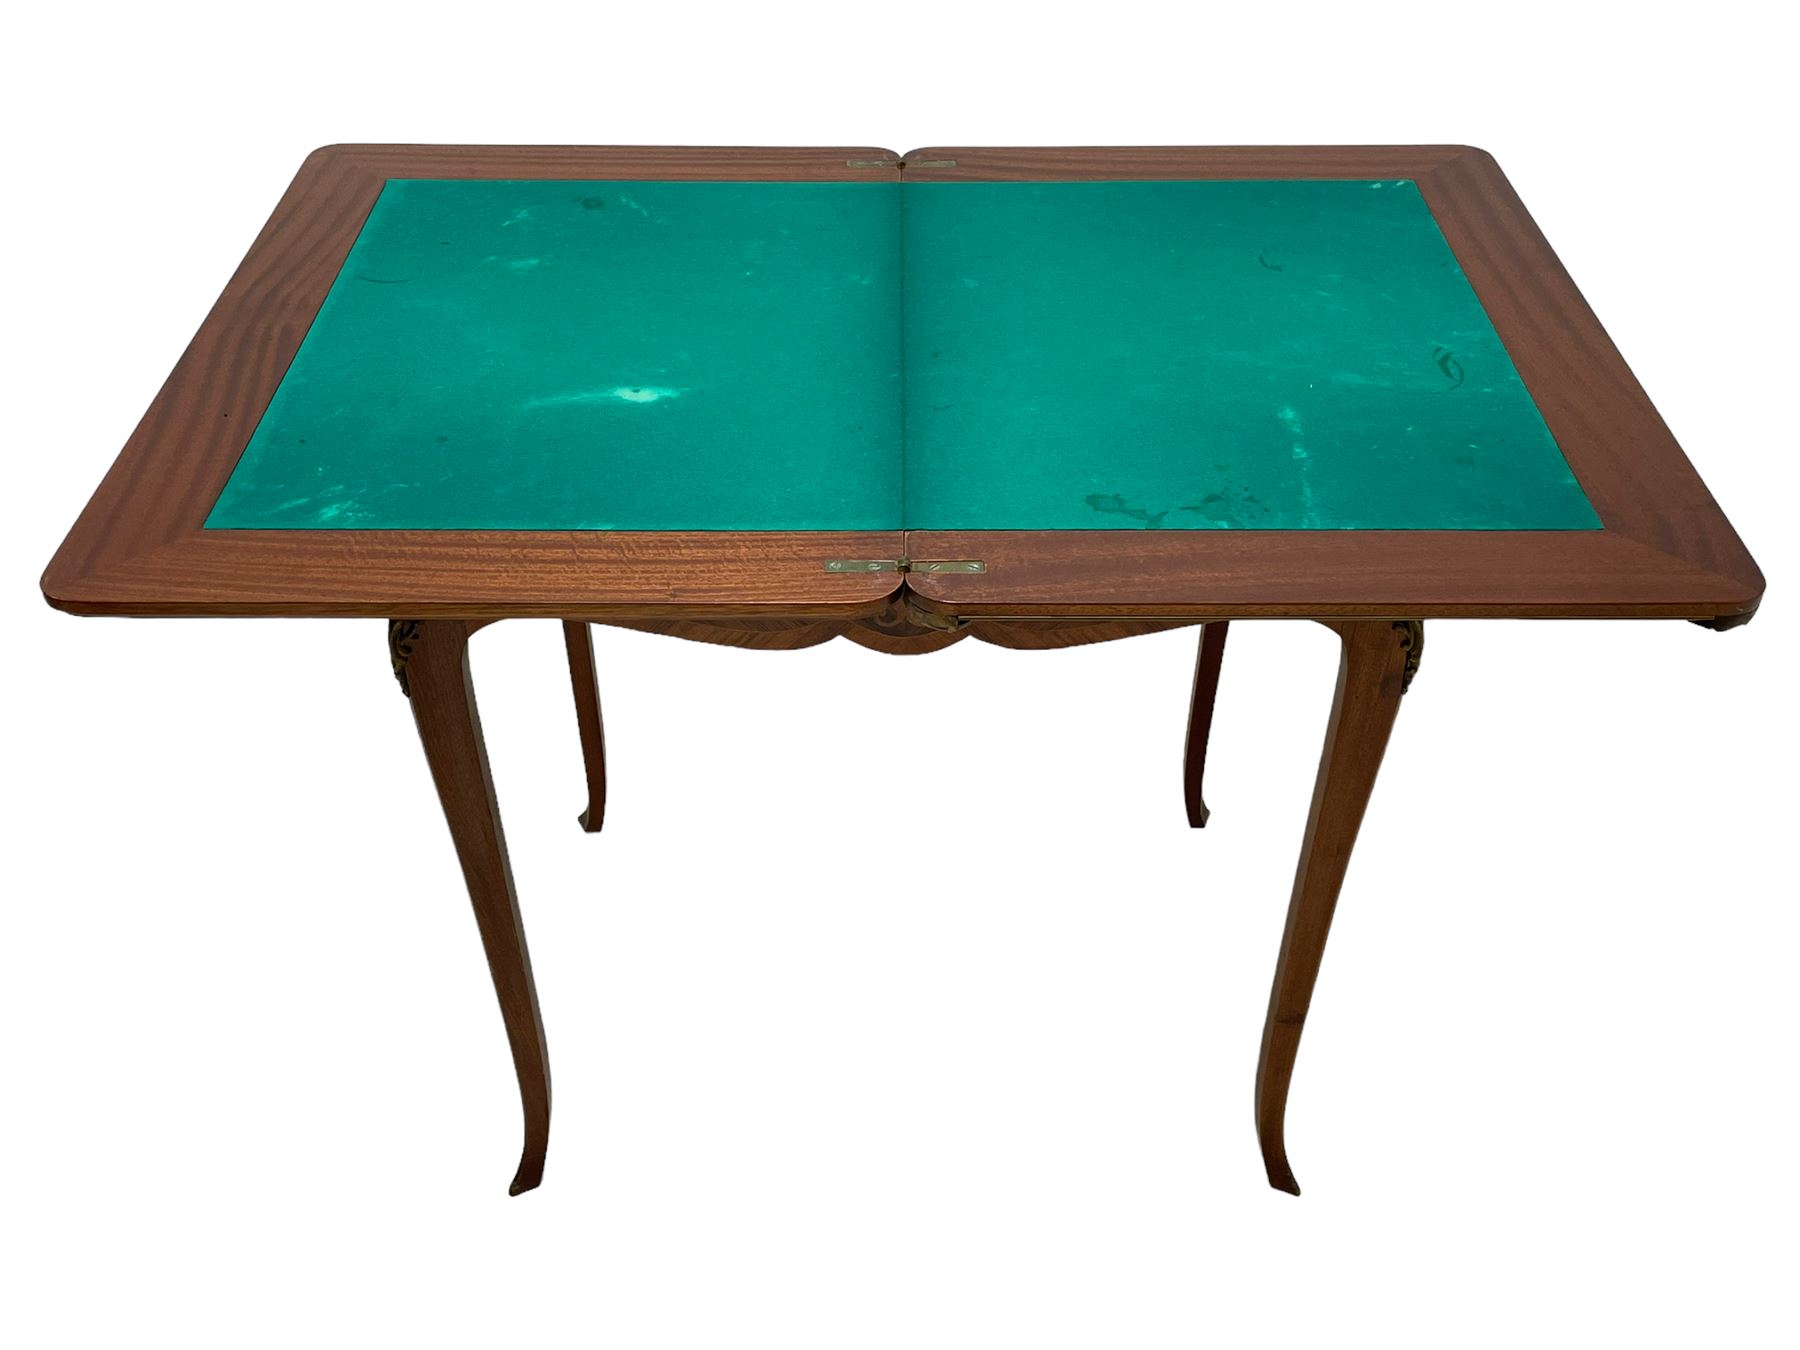 Mid-20th century Kingwood and rosewood card or games table - Image 9 of 10